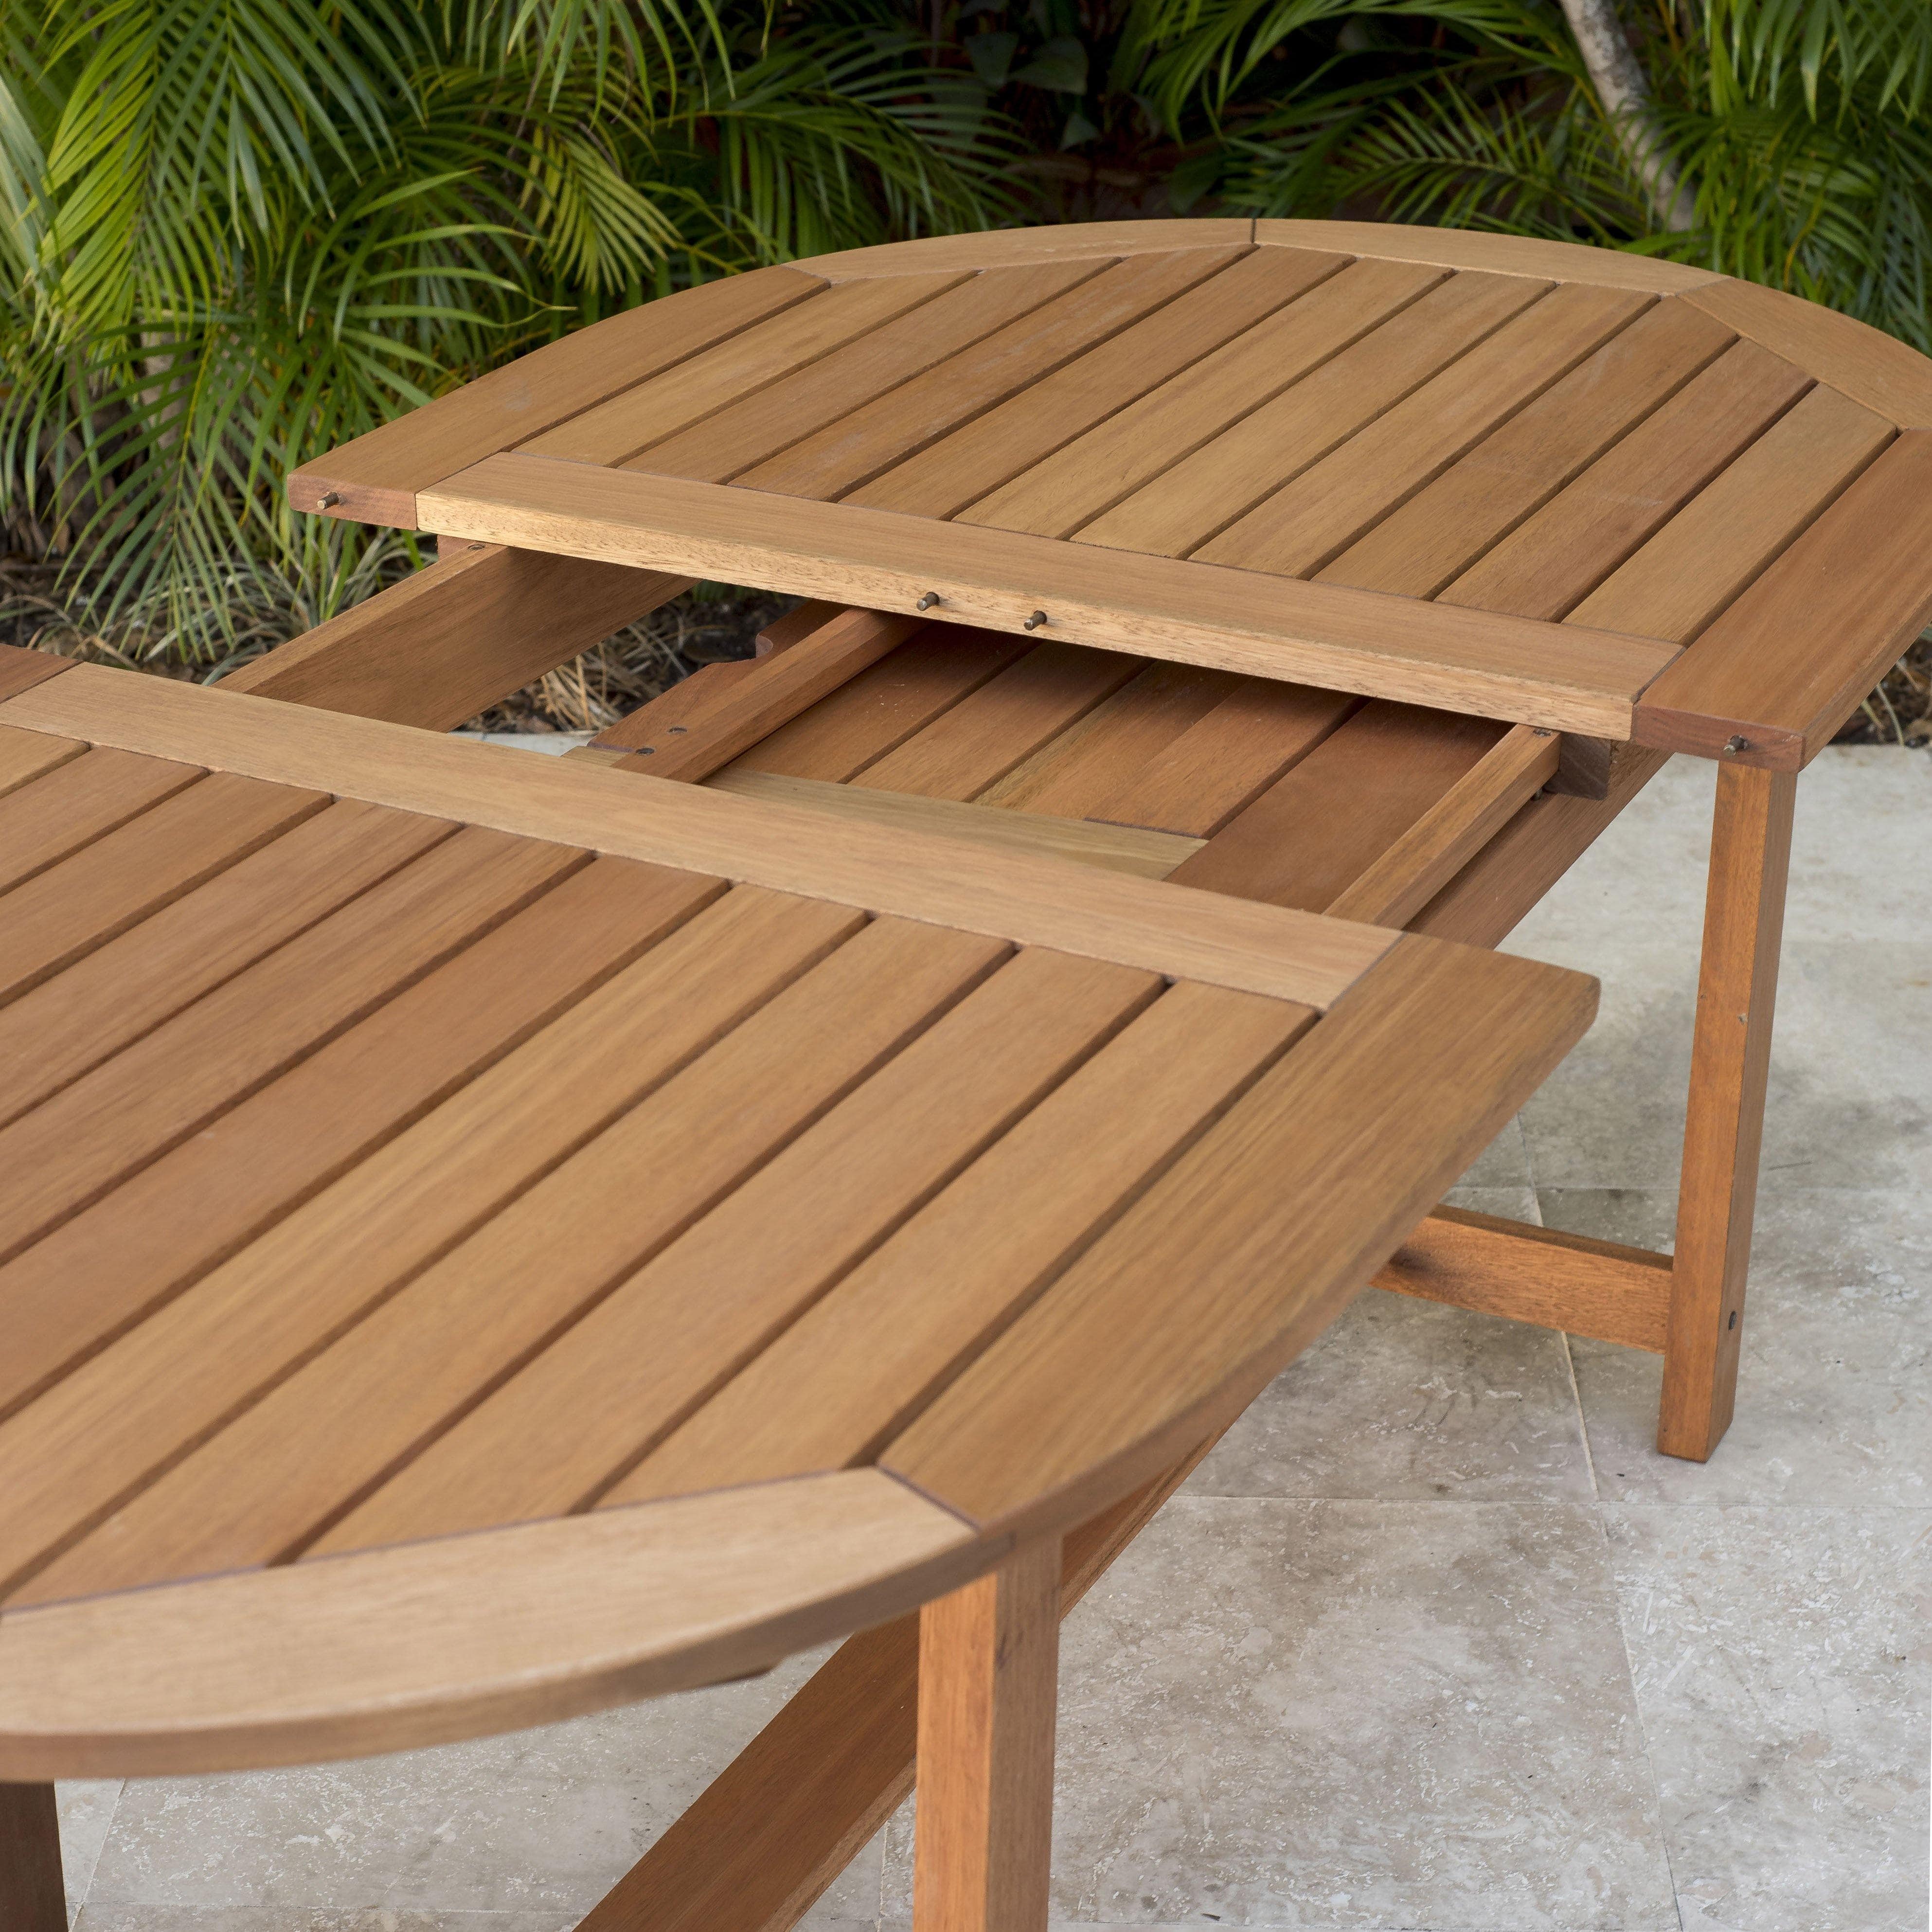 Amazonia Outdoor Teak Dining Set Amazonia 7-Piece Oval Extendable Patio Dining Set | Eucalyptus Wood | Ideal for Outdoors and Indoors